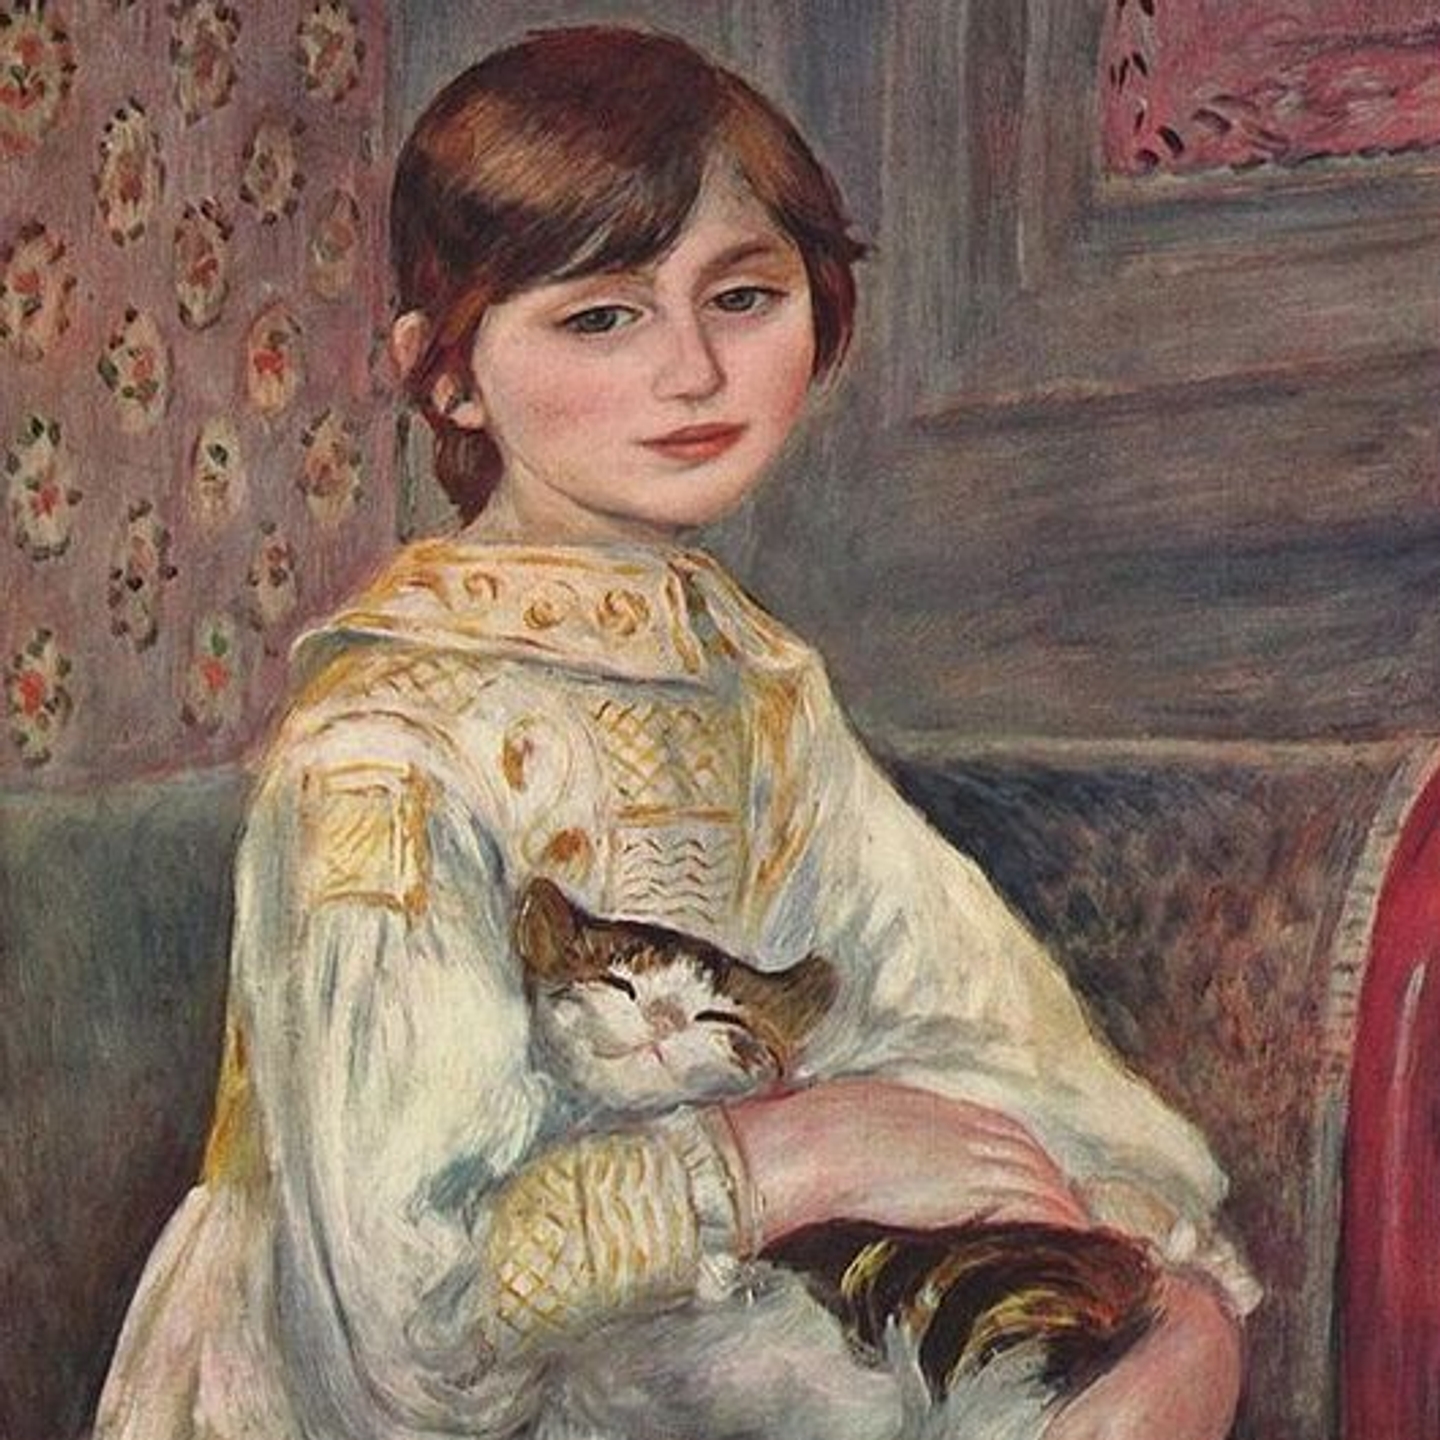 A painting of a young girl holding a sleeping cat in her arms 